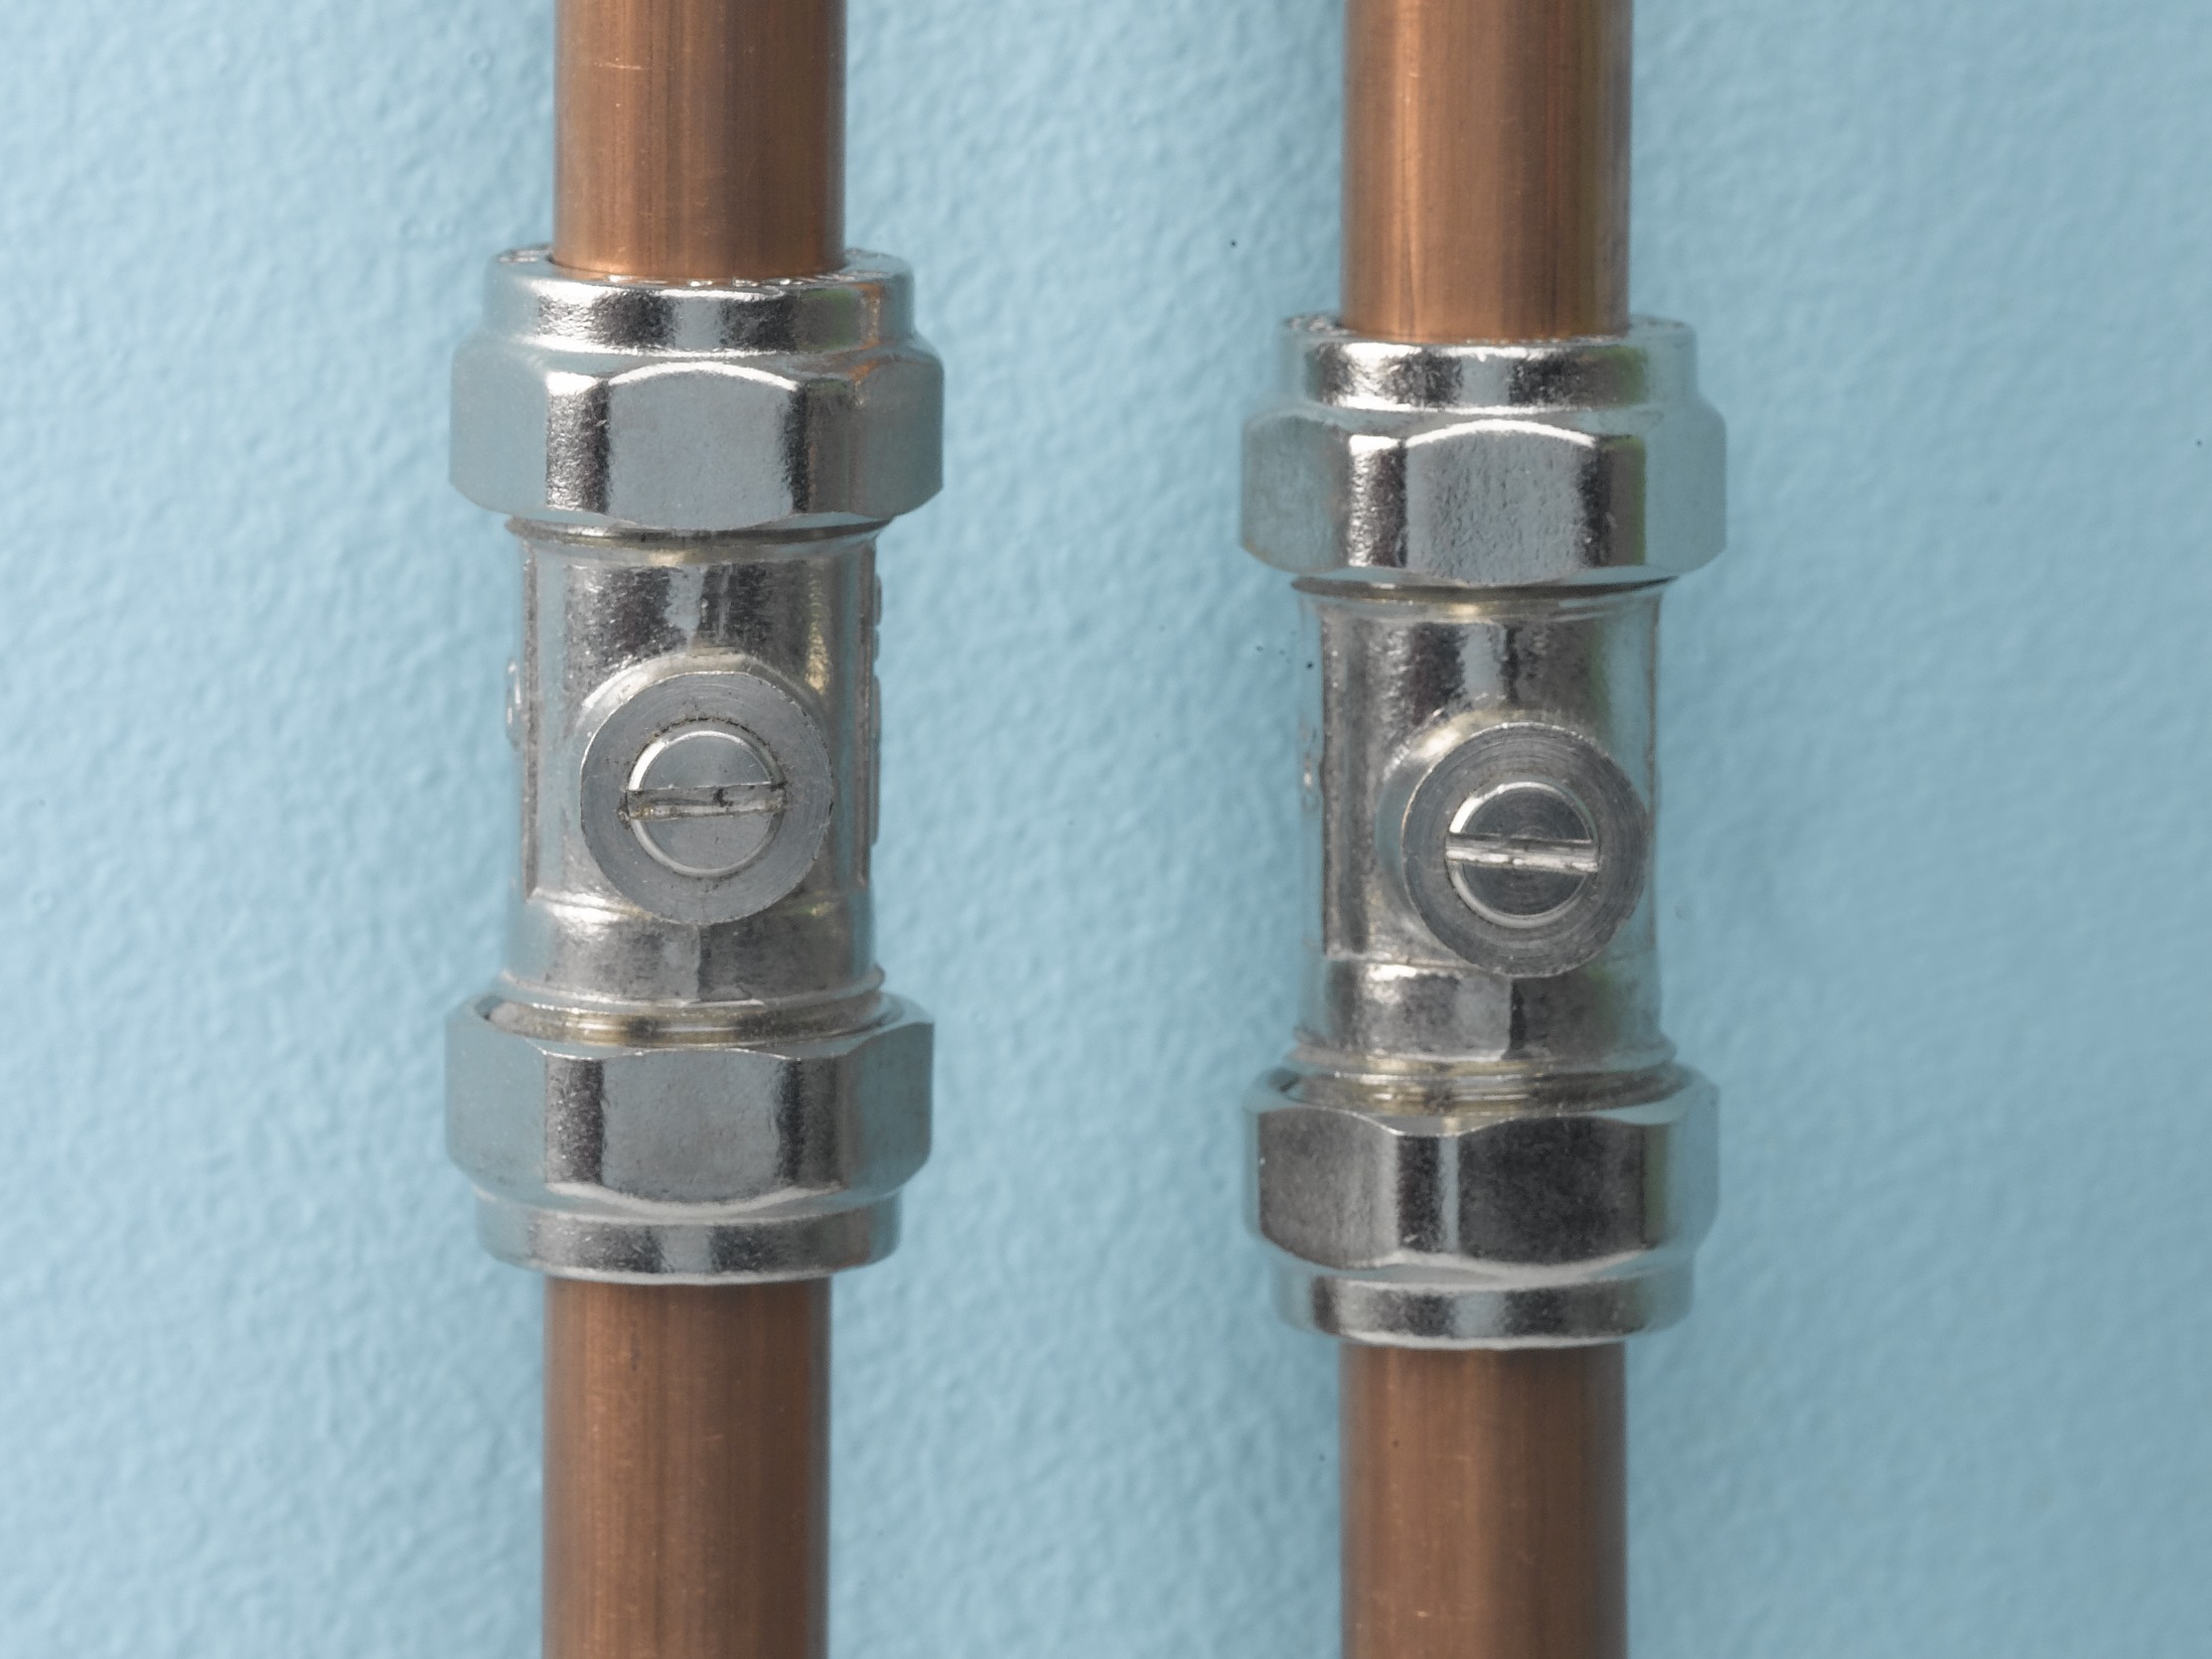  isolation valves used to isolate water supply to a kitchen tap